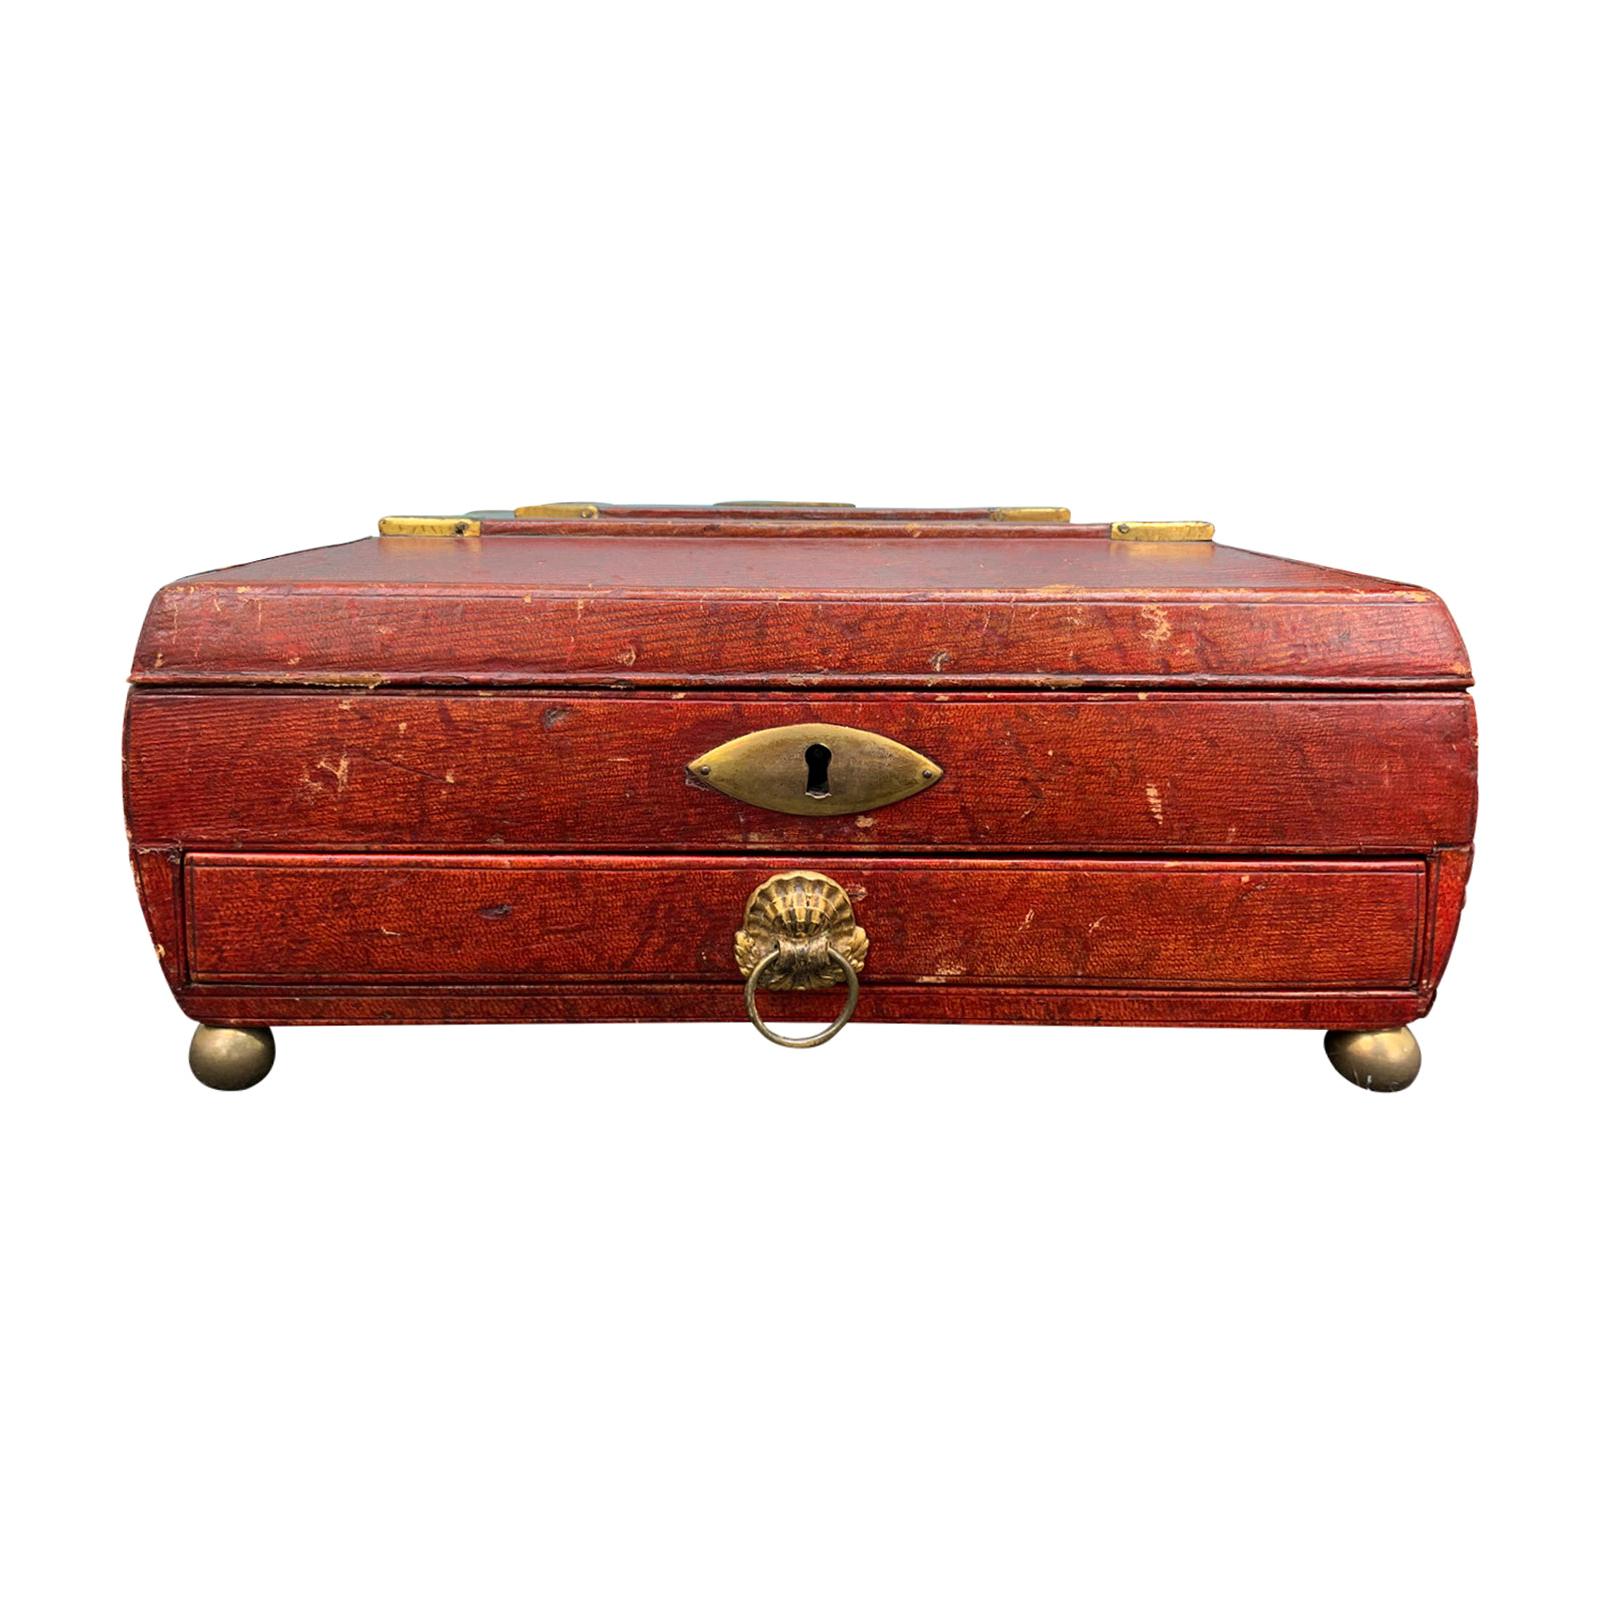 Early 19th Century Regency Red Leather Chinoiserie Sewing Box, Initialed & Dated For Sale